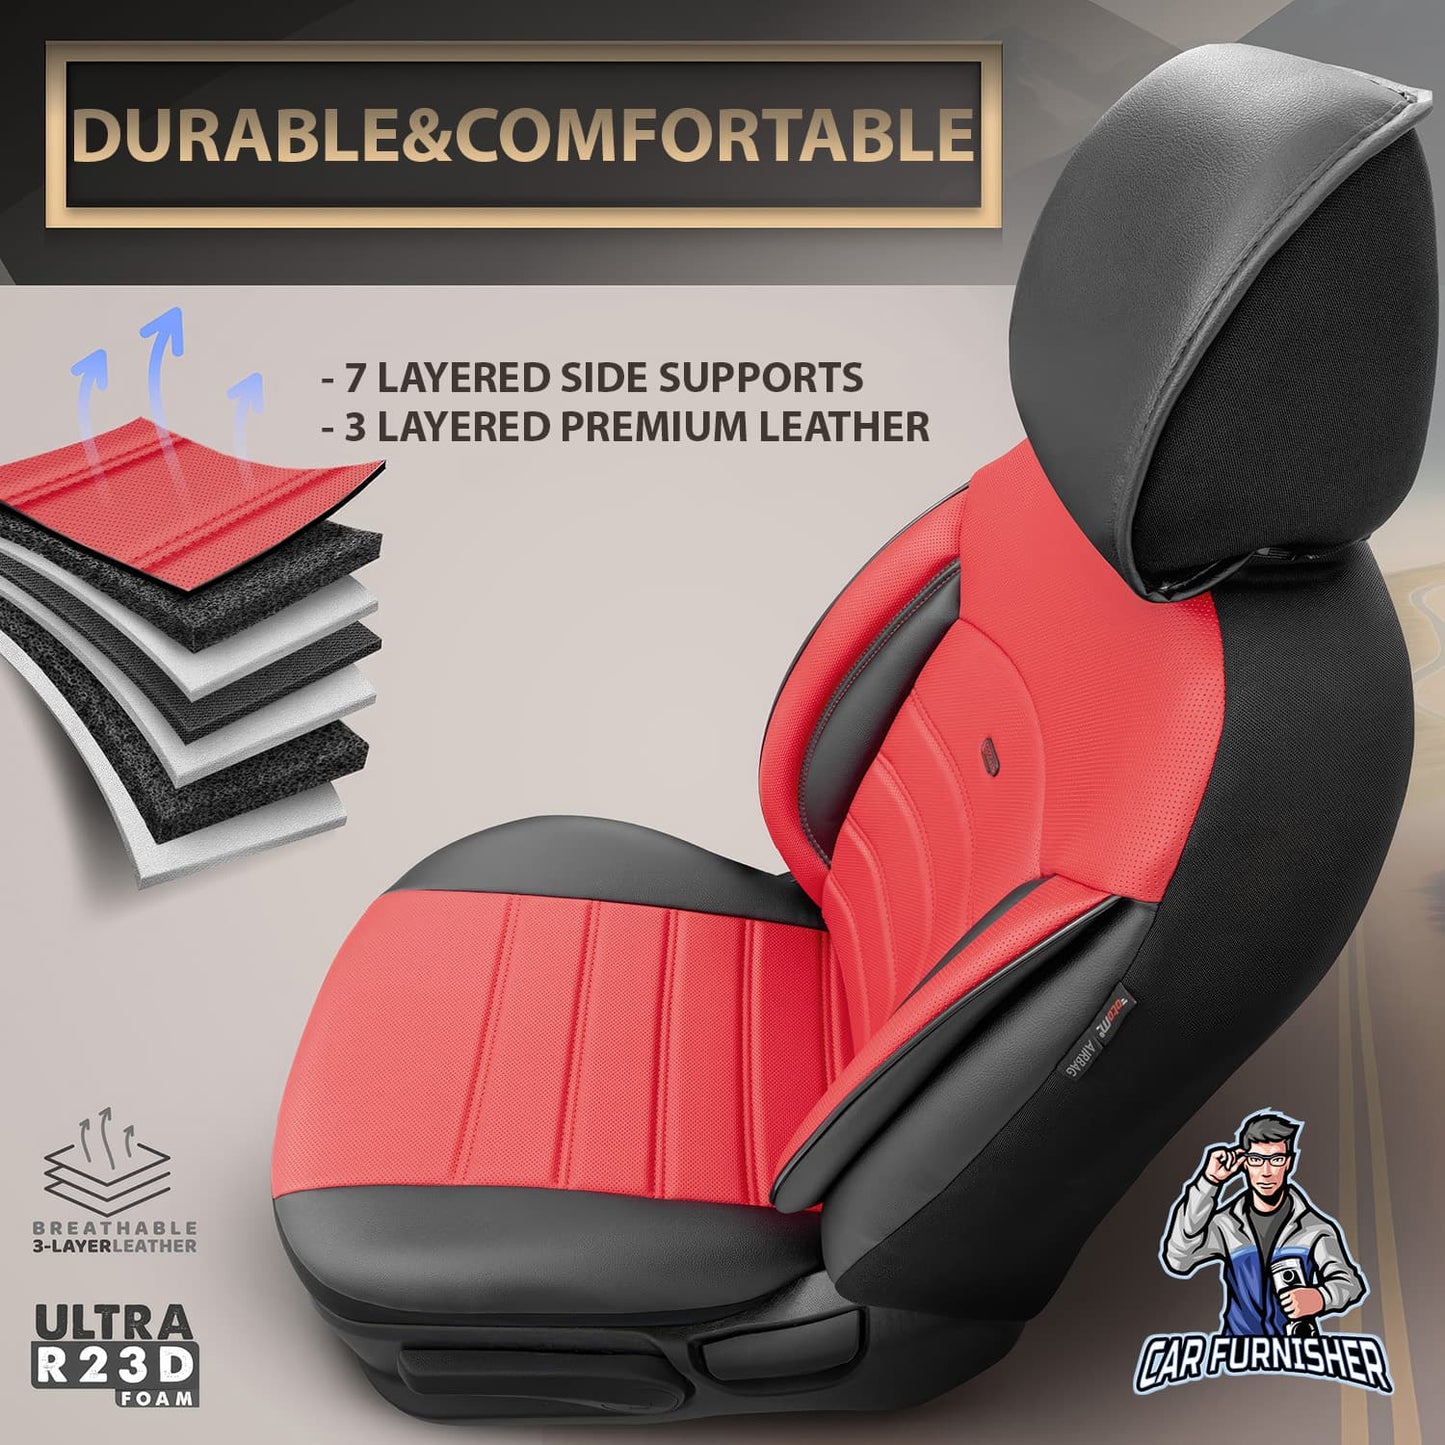 Mercedes 190 Seat Covers Inspire Design Red 5 Seats + Headrests (Full Set) Full Leather